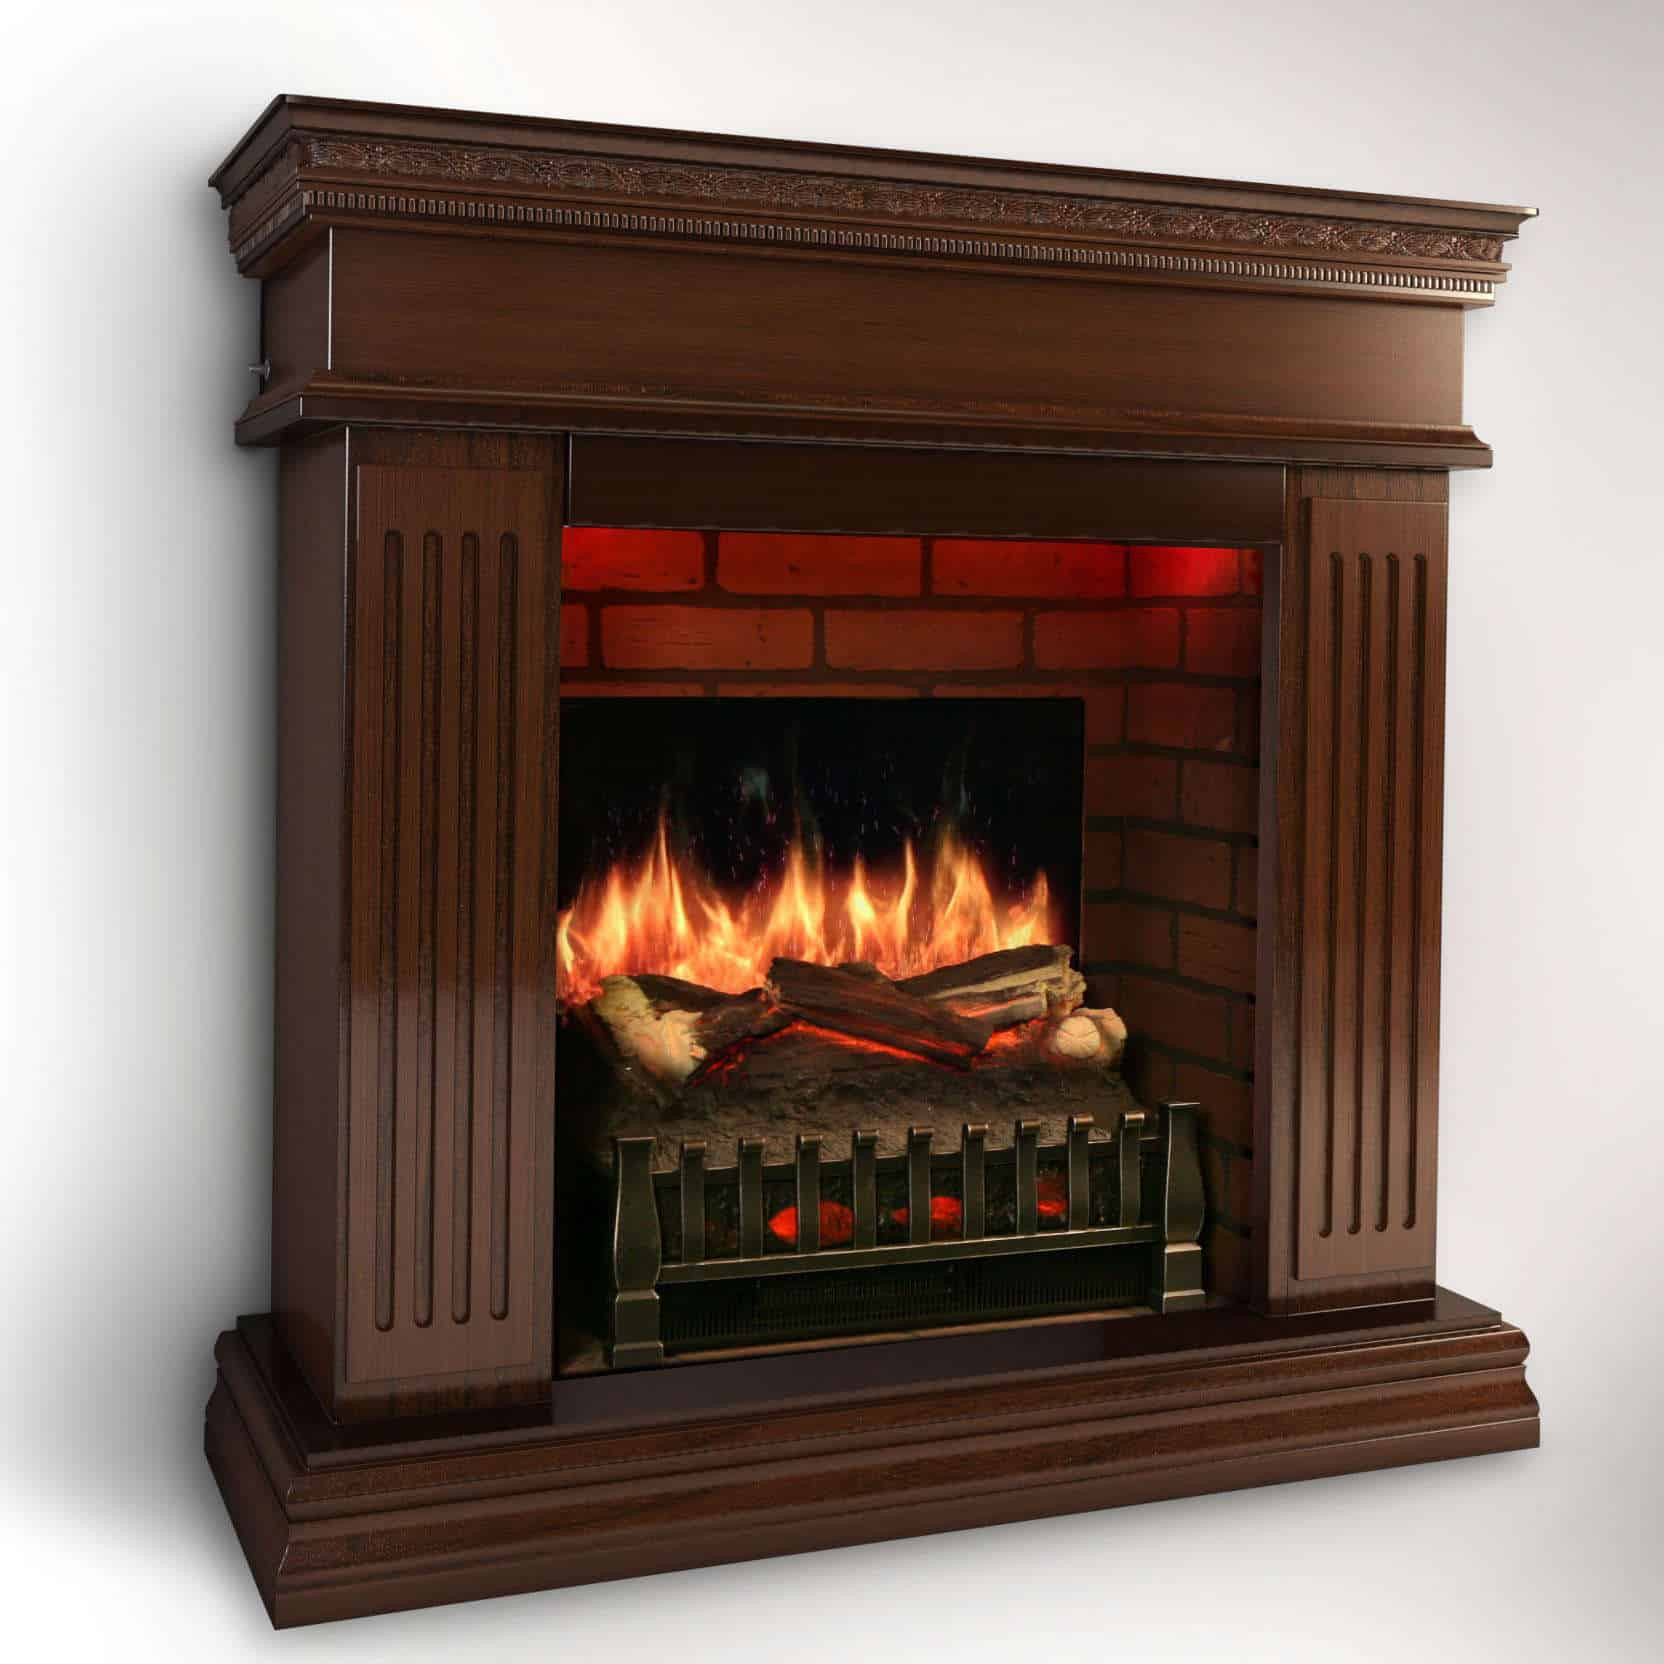 Cherry Wood Electric Fireplace
 MagikFlame Electric Fireplace [ENGLISH CHERRY WOOD] – Most